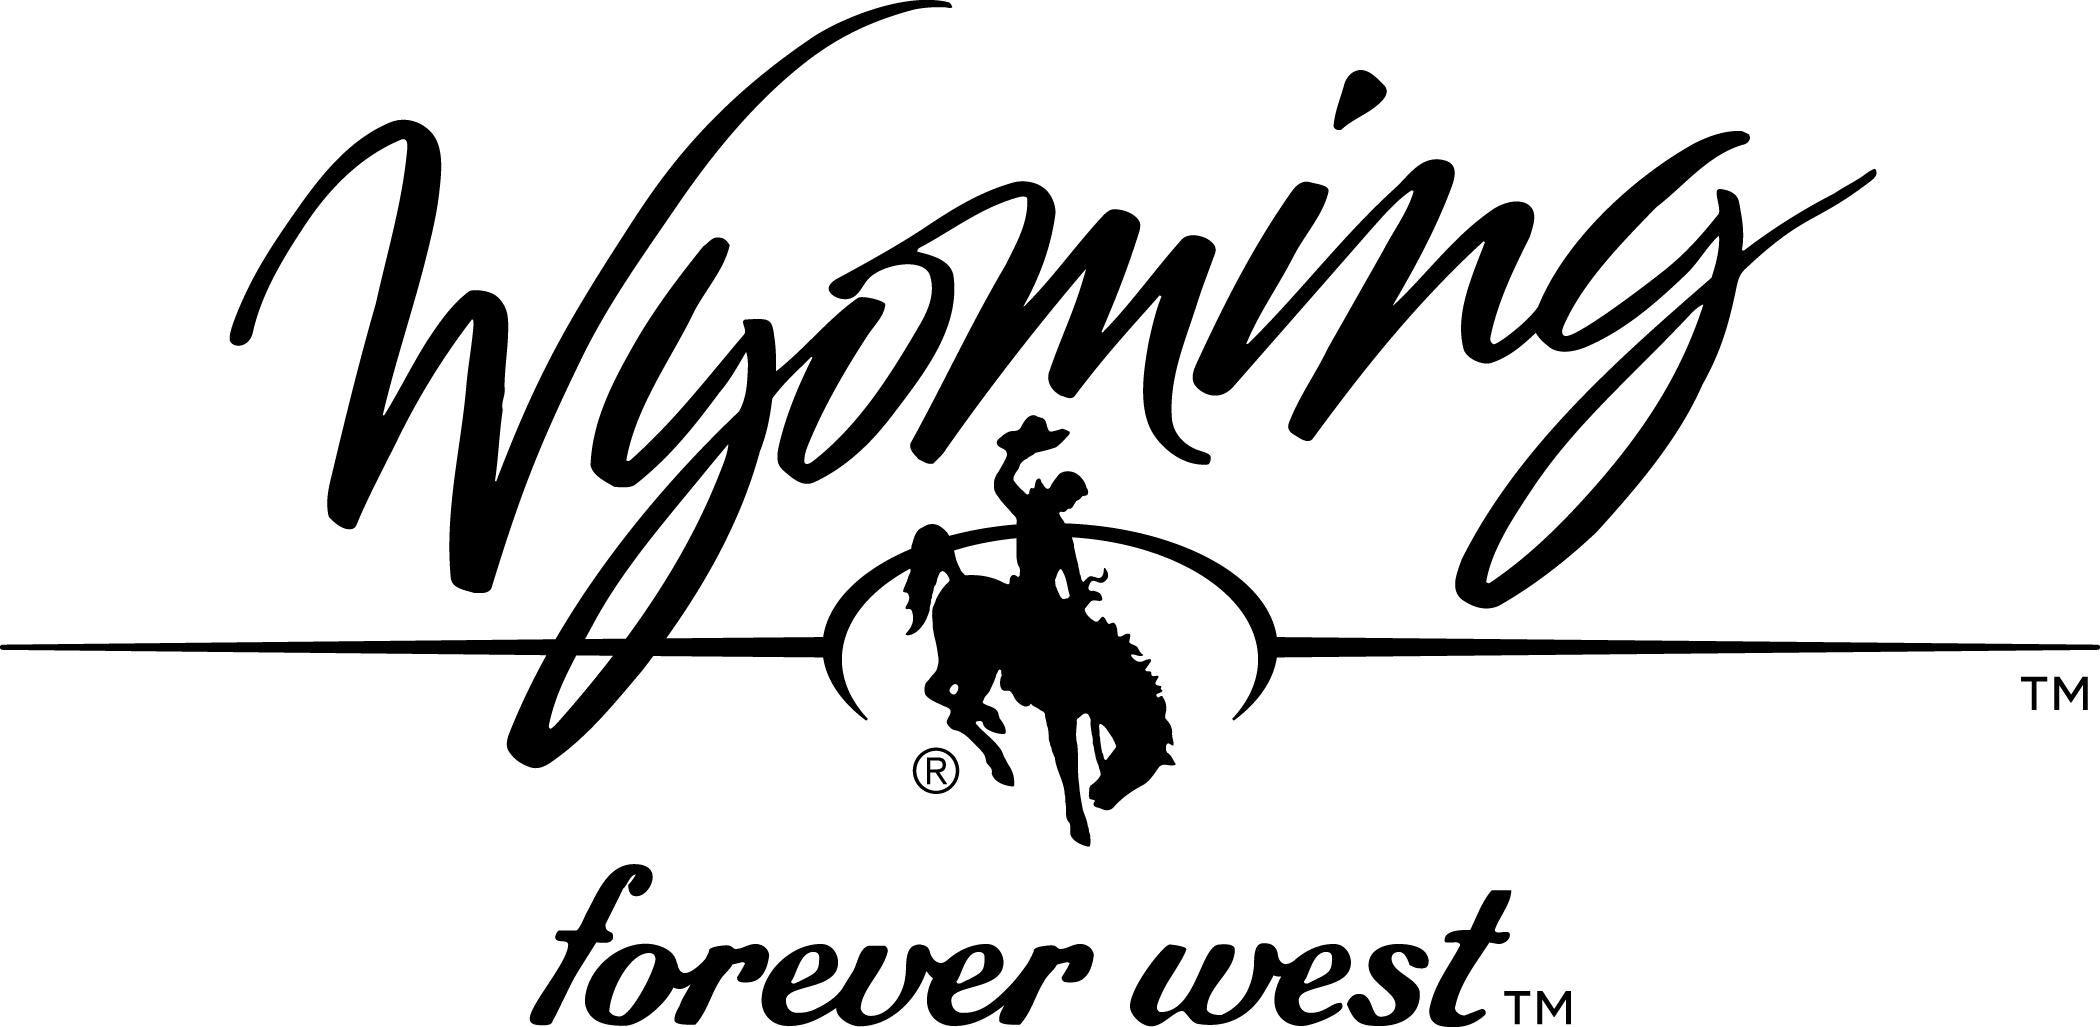 Wyoming Logo - Office Of Tourism Looks To Nationwide Marketing, Parks Centennial To